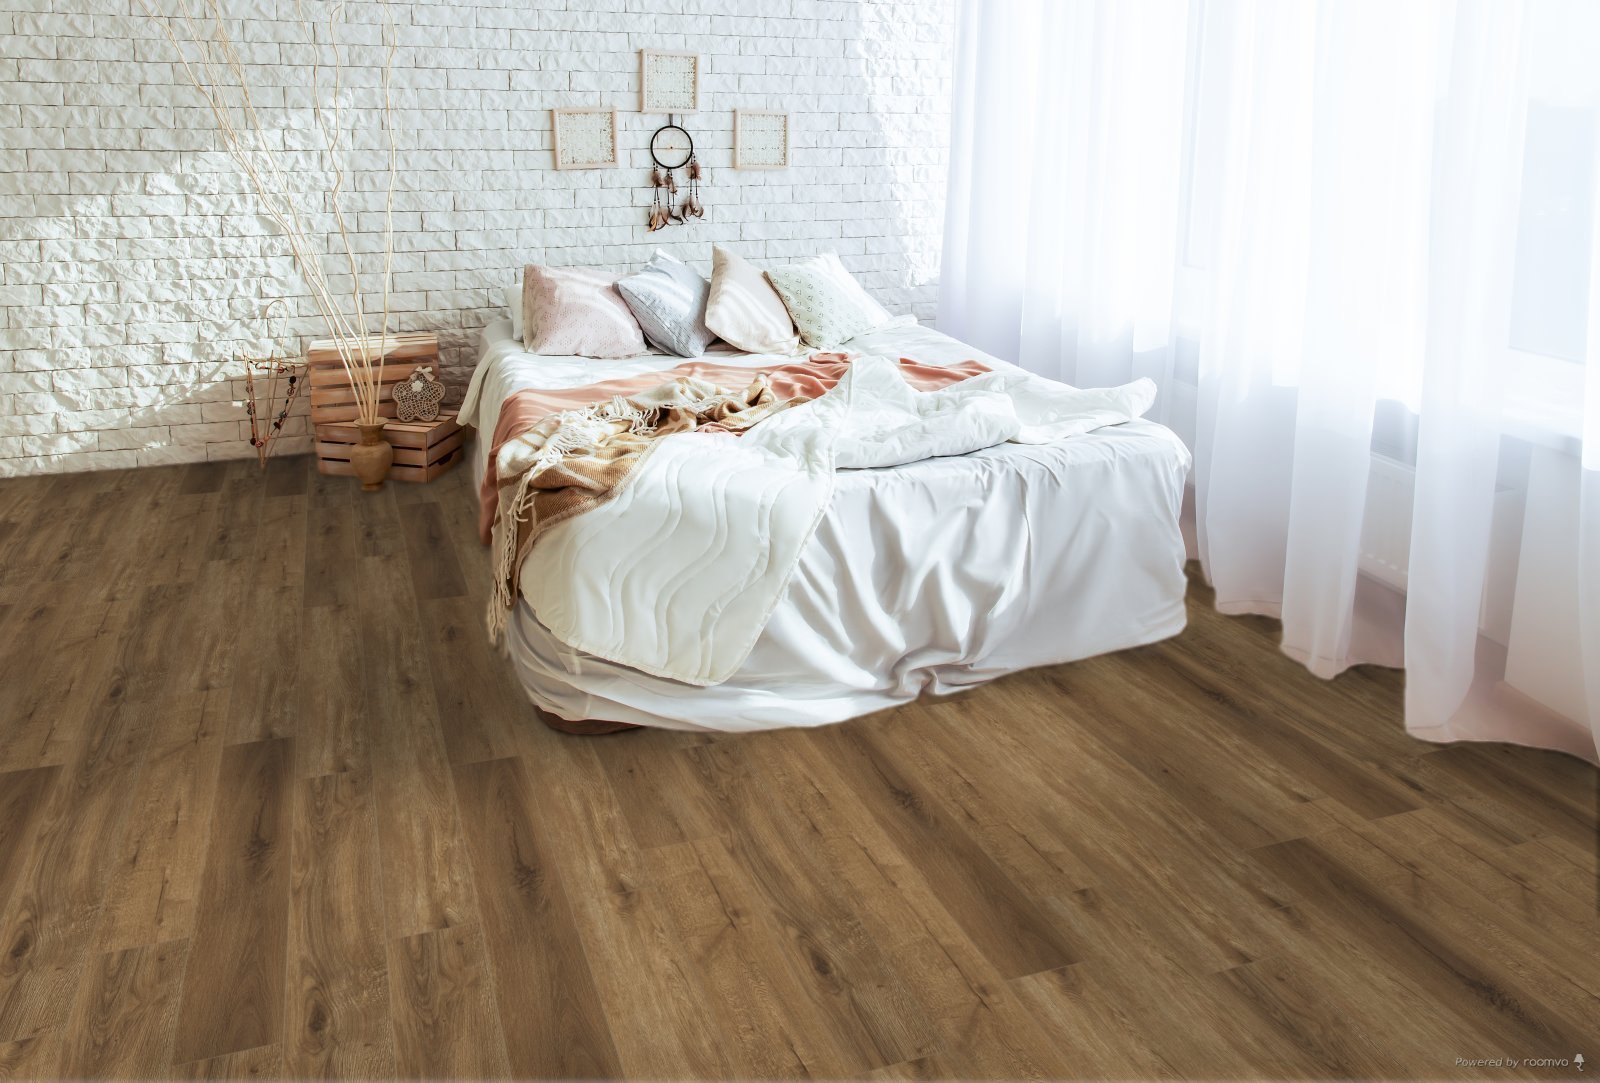 Horizen Flooring presents to you a picture of a quality wide plank Waycross luxury vinyl plank. NovoCore Premium EIR collection features a wide range of colors & designs that will compliment any interior. Natural wood grain synchronized surface allow for an authentic hardwood look & feel. This collection features a 0.25″ / 6.5 mm overall thickness and a durable 22 mil / 0.55 mm wear layer for residential and commercial applications.